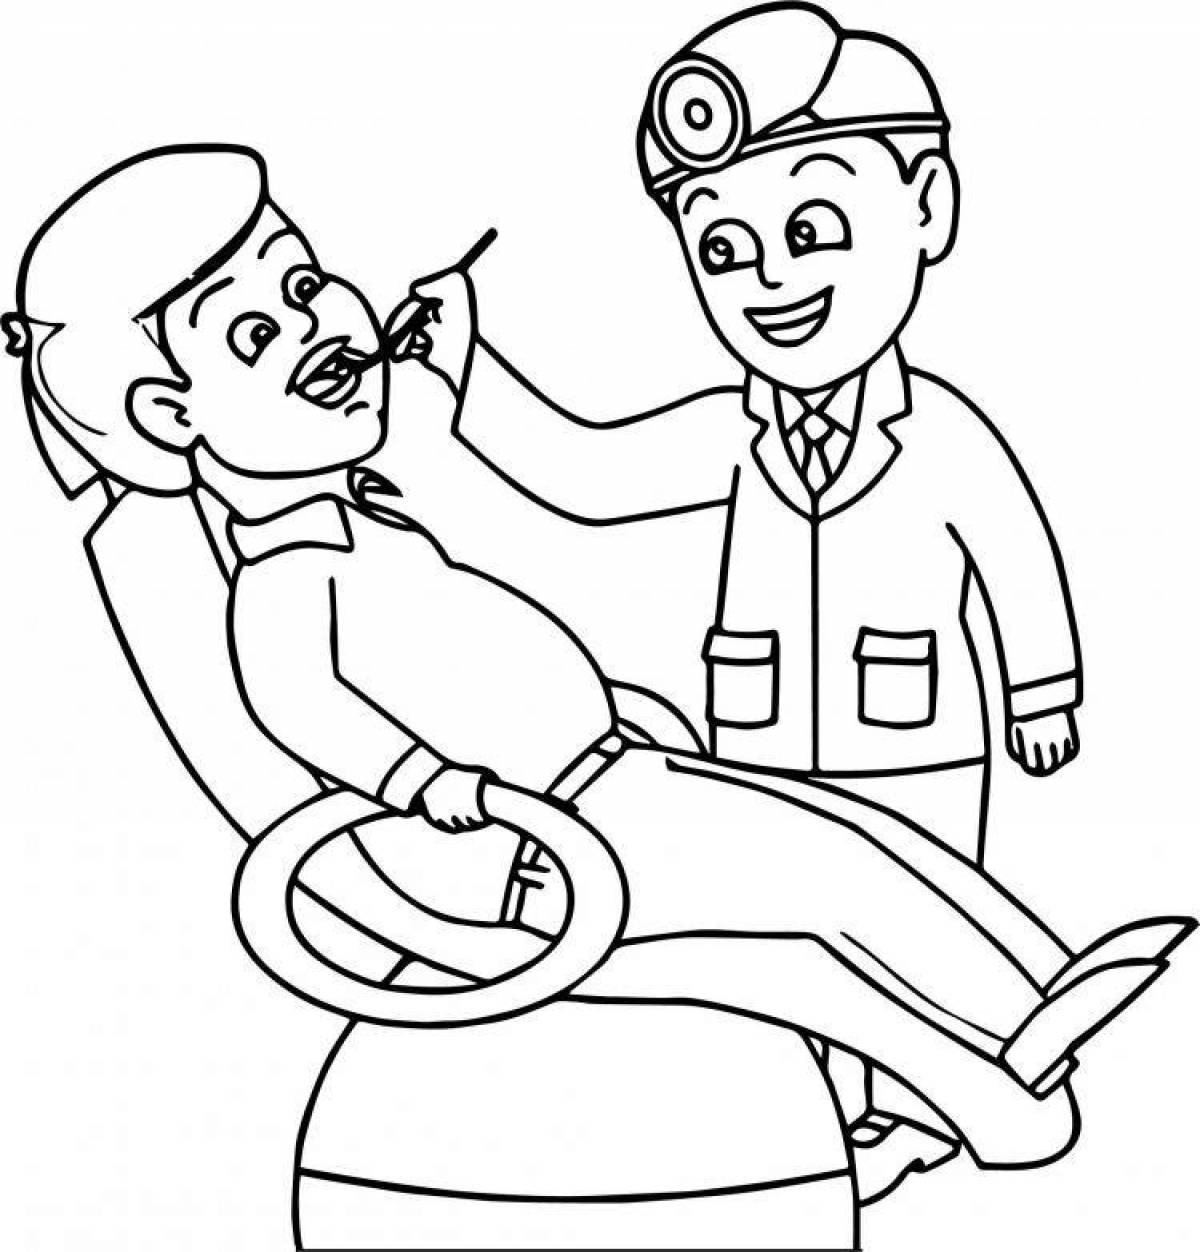 Coloring book excellent profession of a doctor